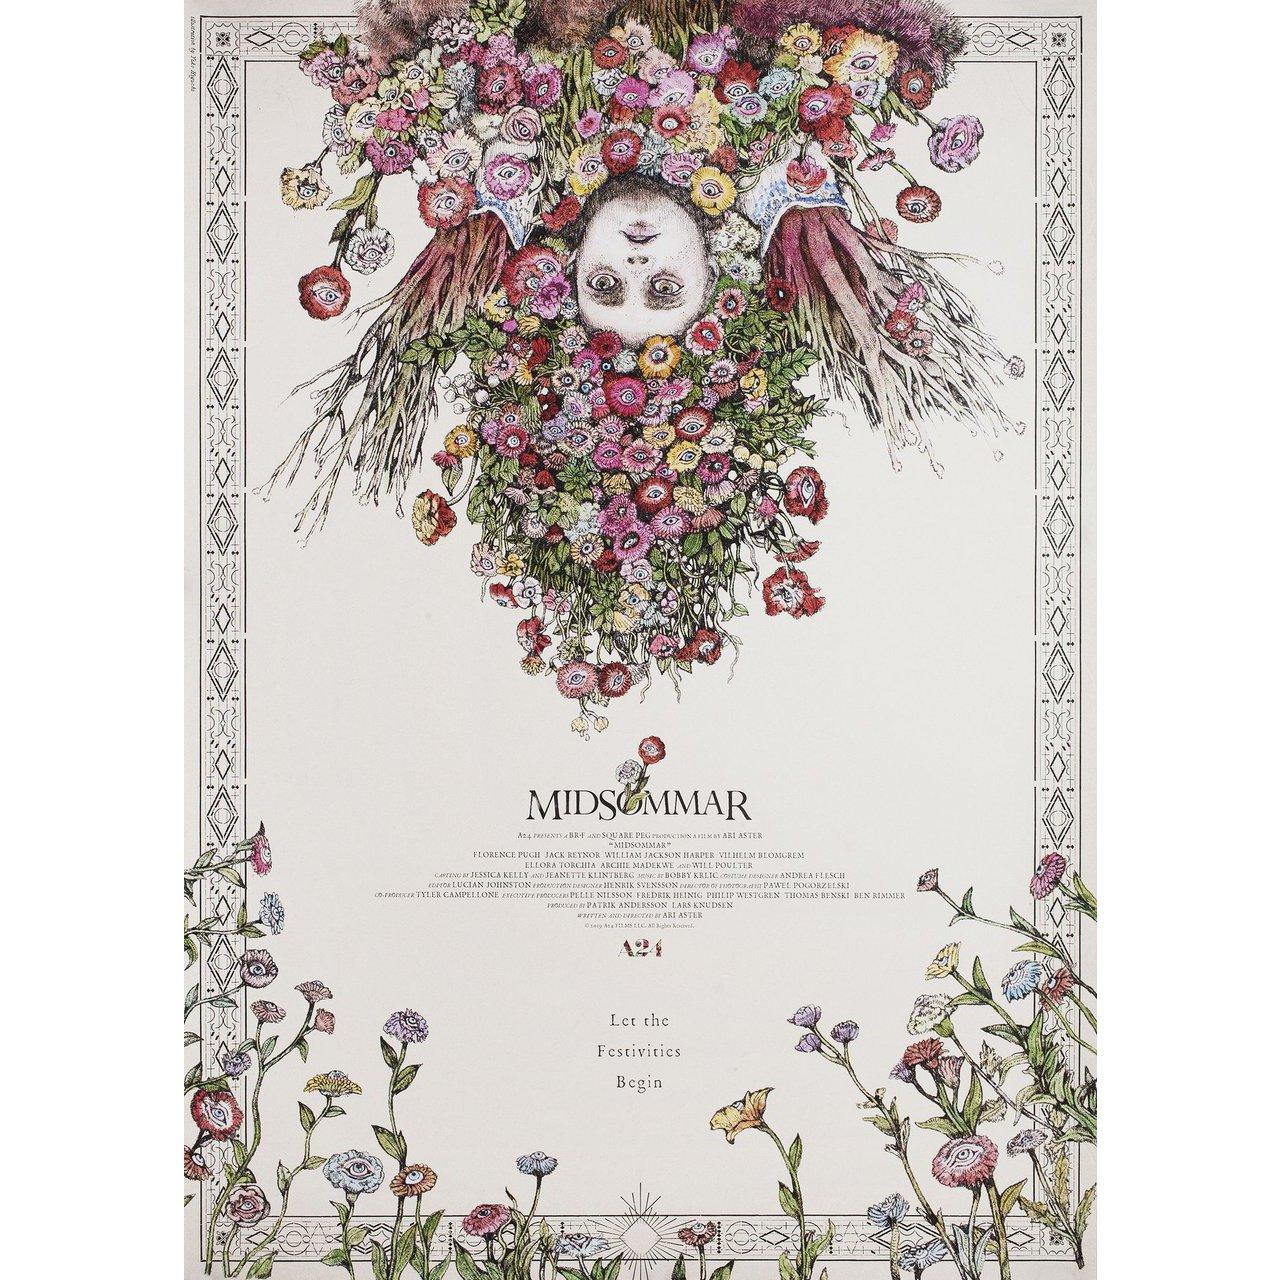 Original 2019 Japanese B1 poster by Yuko Higuchi for the film Midsommar directed by Ari Aster with Florence Pugh / Jack Reynor / Vilhelm Blomgren / William Jackson Harper. Fine condition, rolled. Please note: the size is stated in inches and the